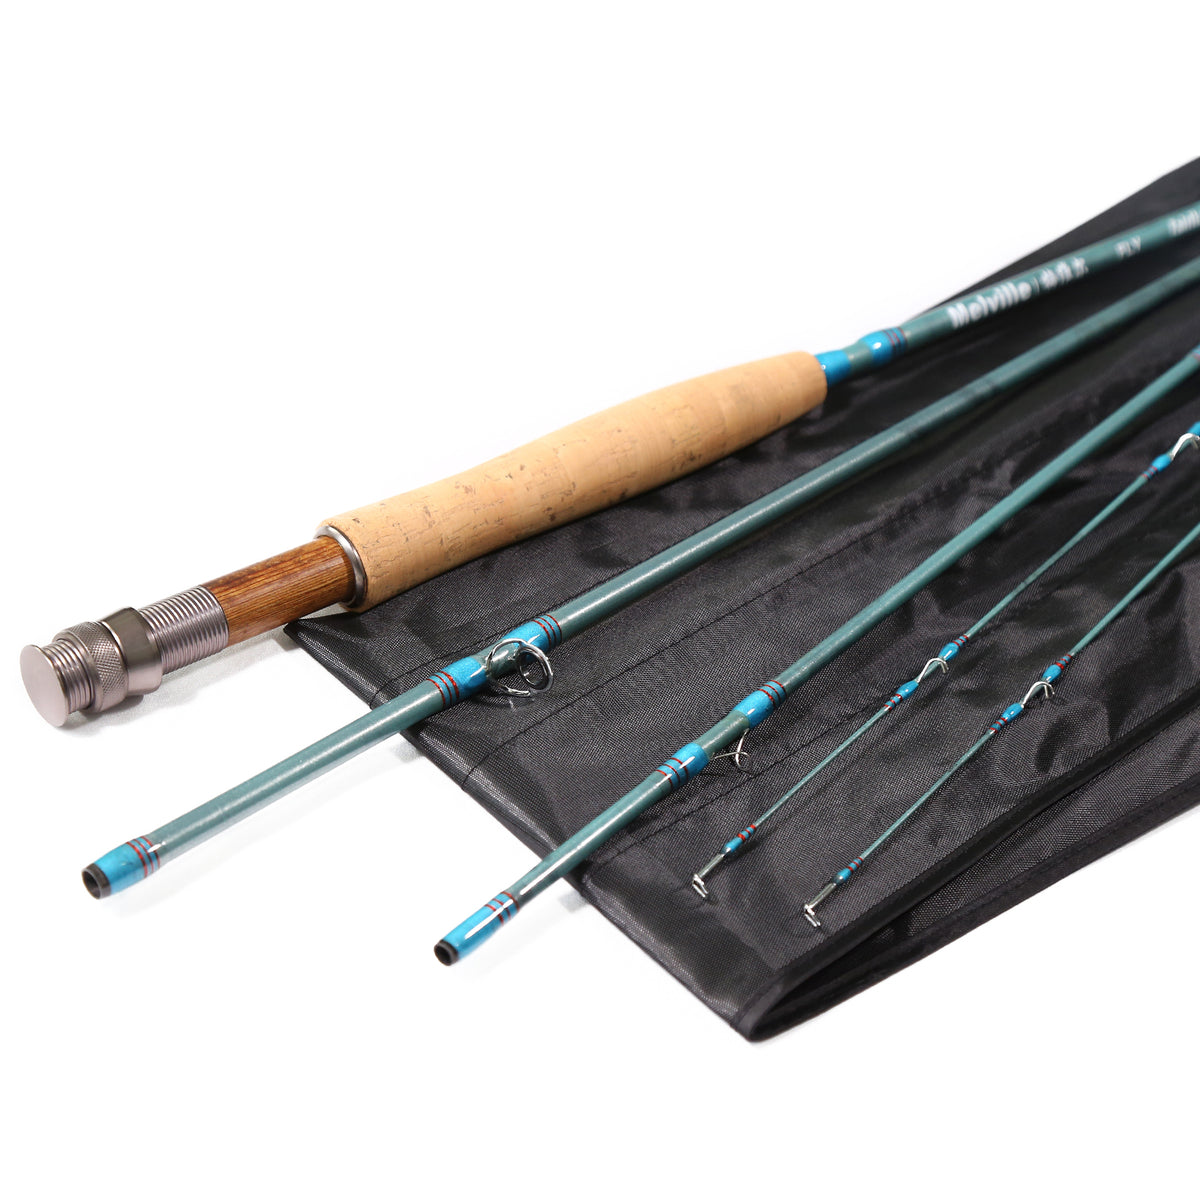 Wychwood RS Fly Fishing Rod 9ft 10ft 4 Piece All Sizes With Carbon Rod Tube 